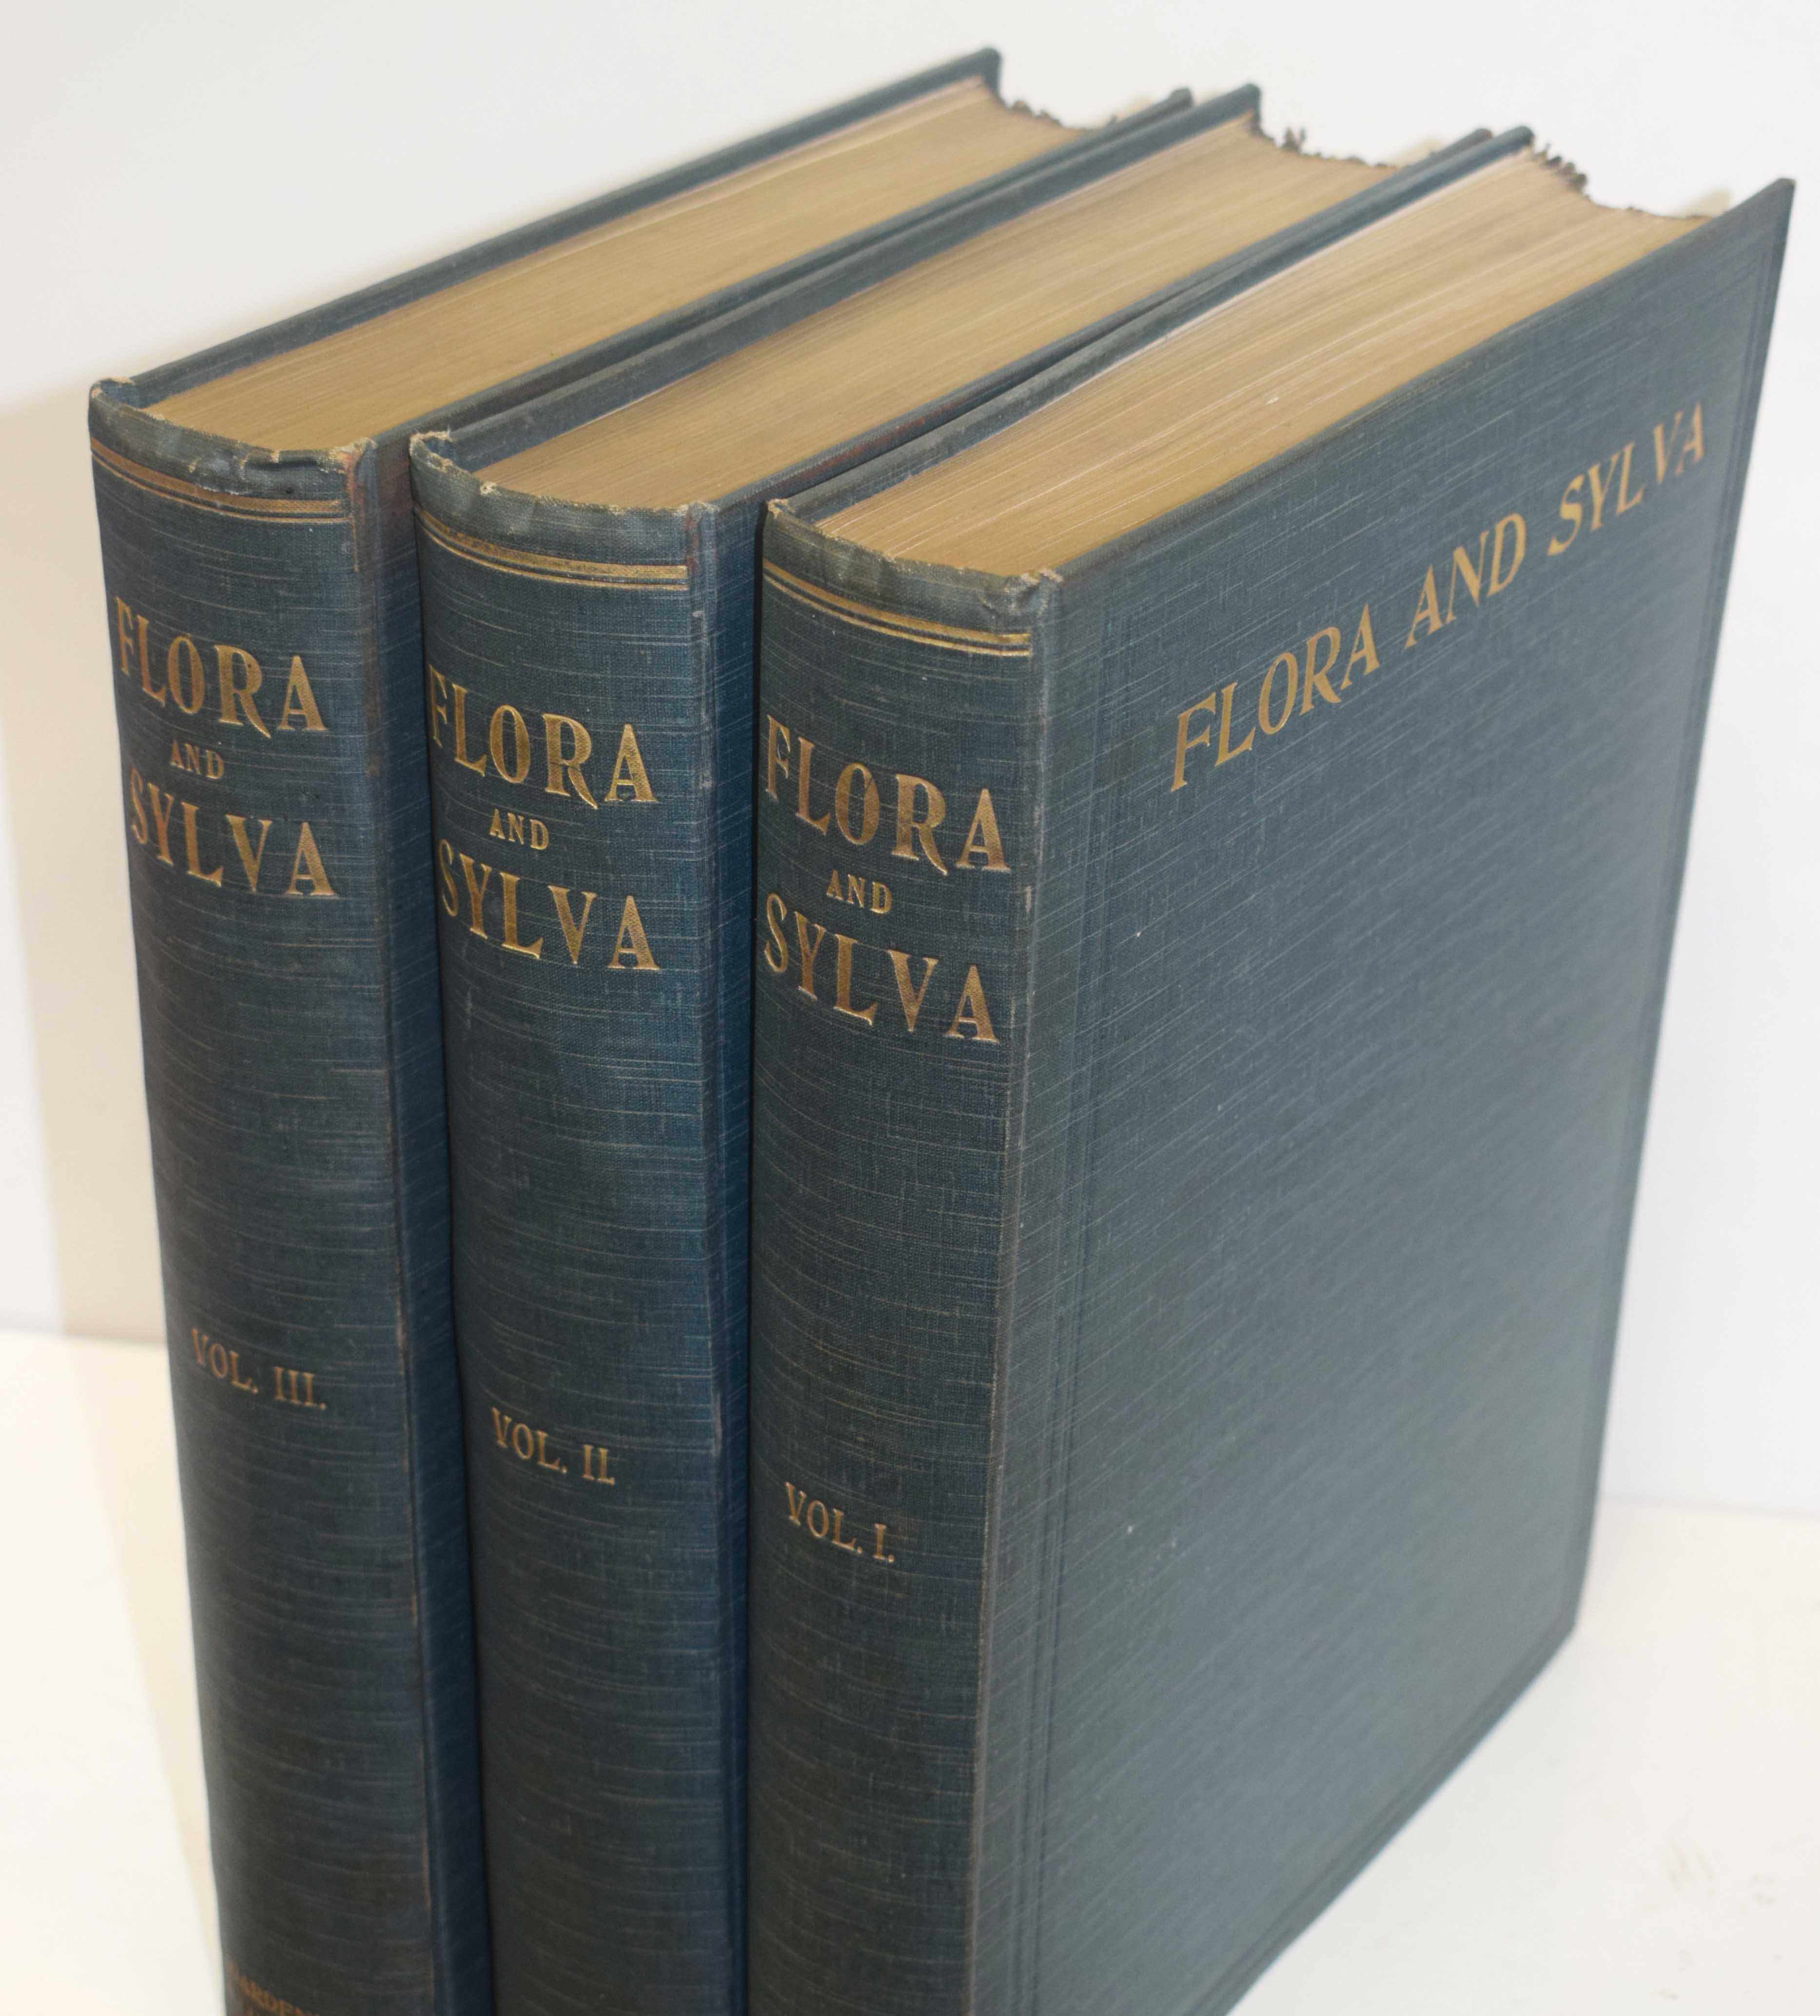 Flora and Sylva. A Monthly Review for Lovers of Garden, Woodland, Tree or Flower; New and Rare Plants, Trees, Shrubs, and Fruits; the Garden Beautiful, Home Woods, and Home Landscape. 3 volume set.